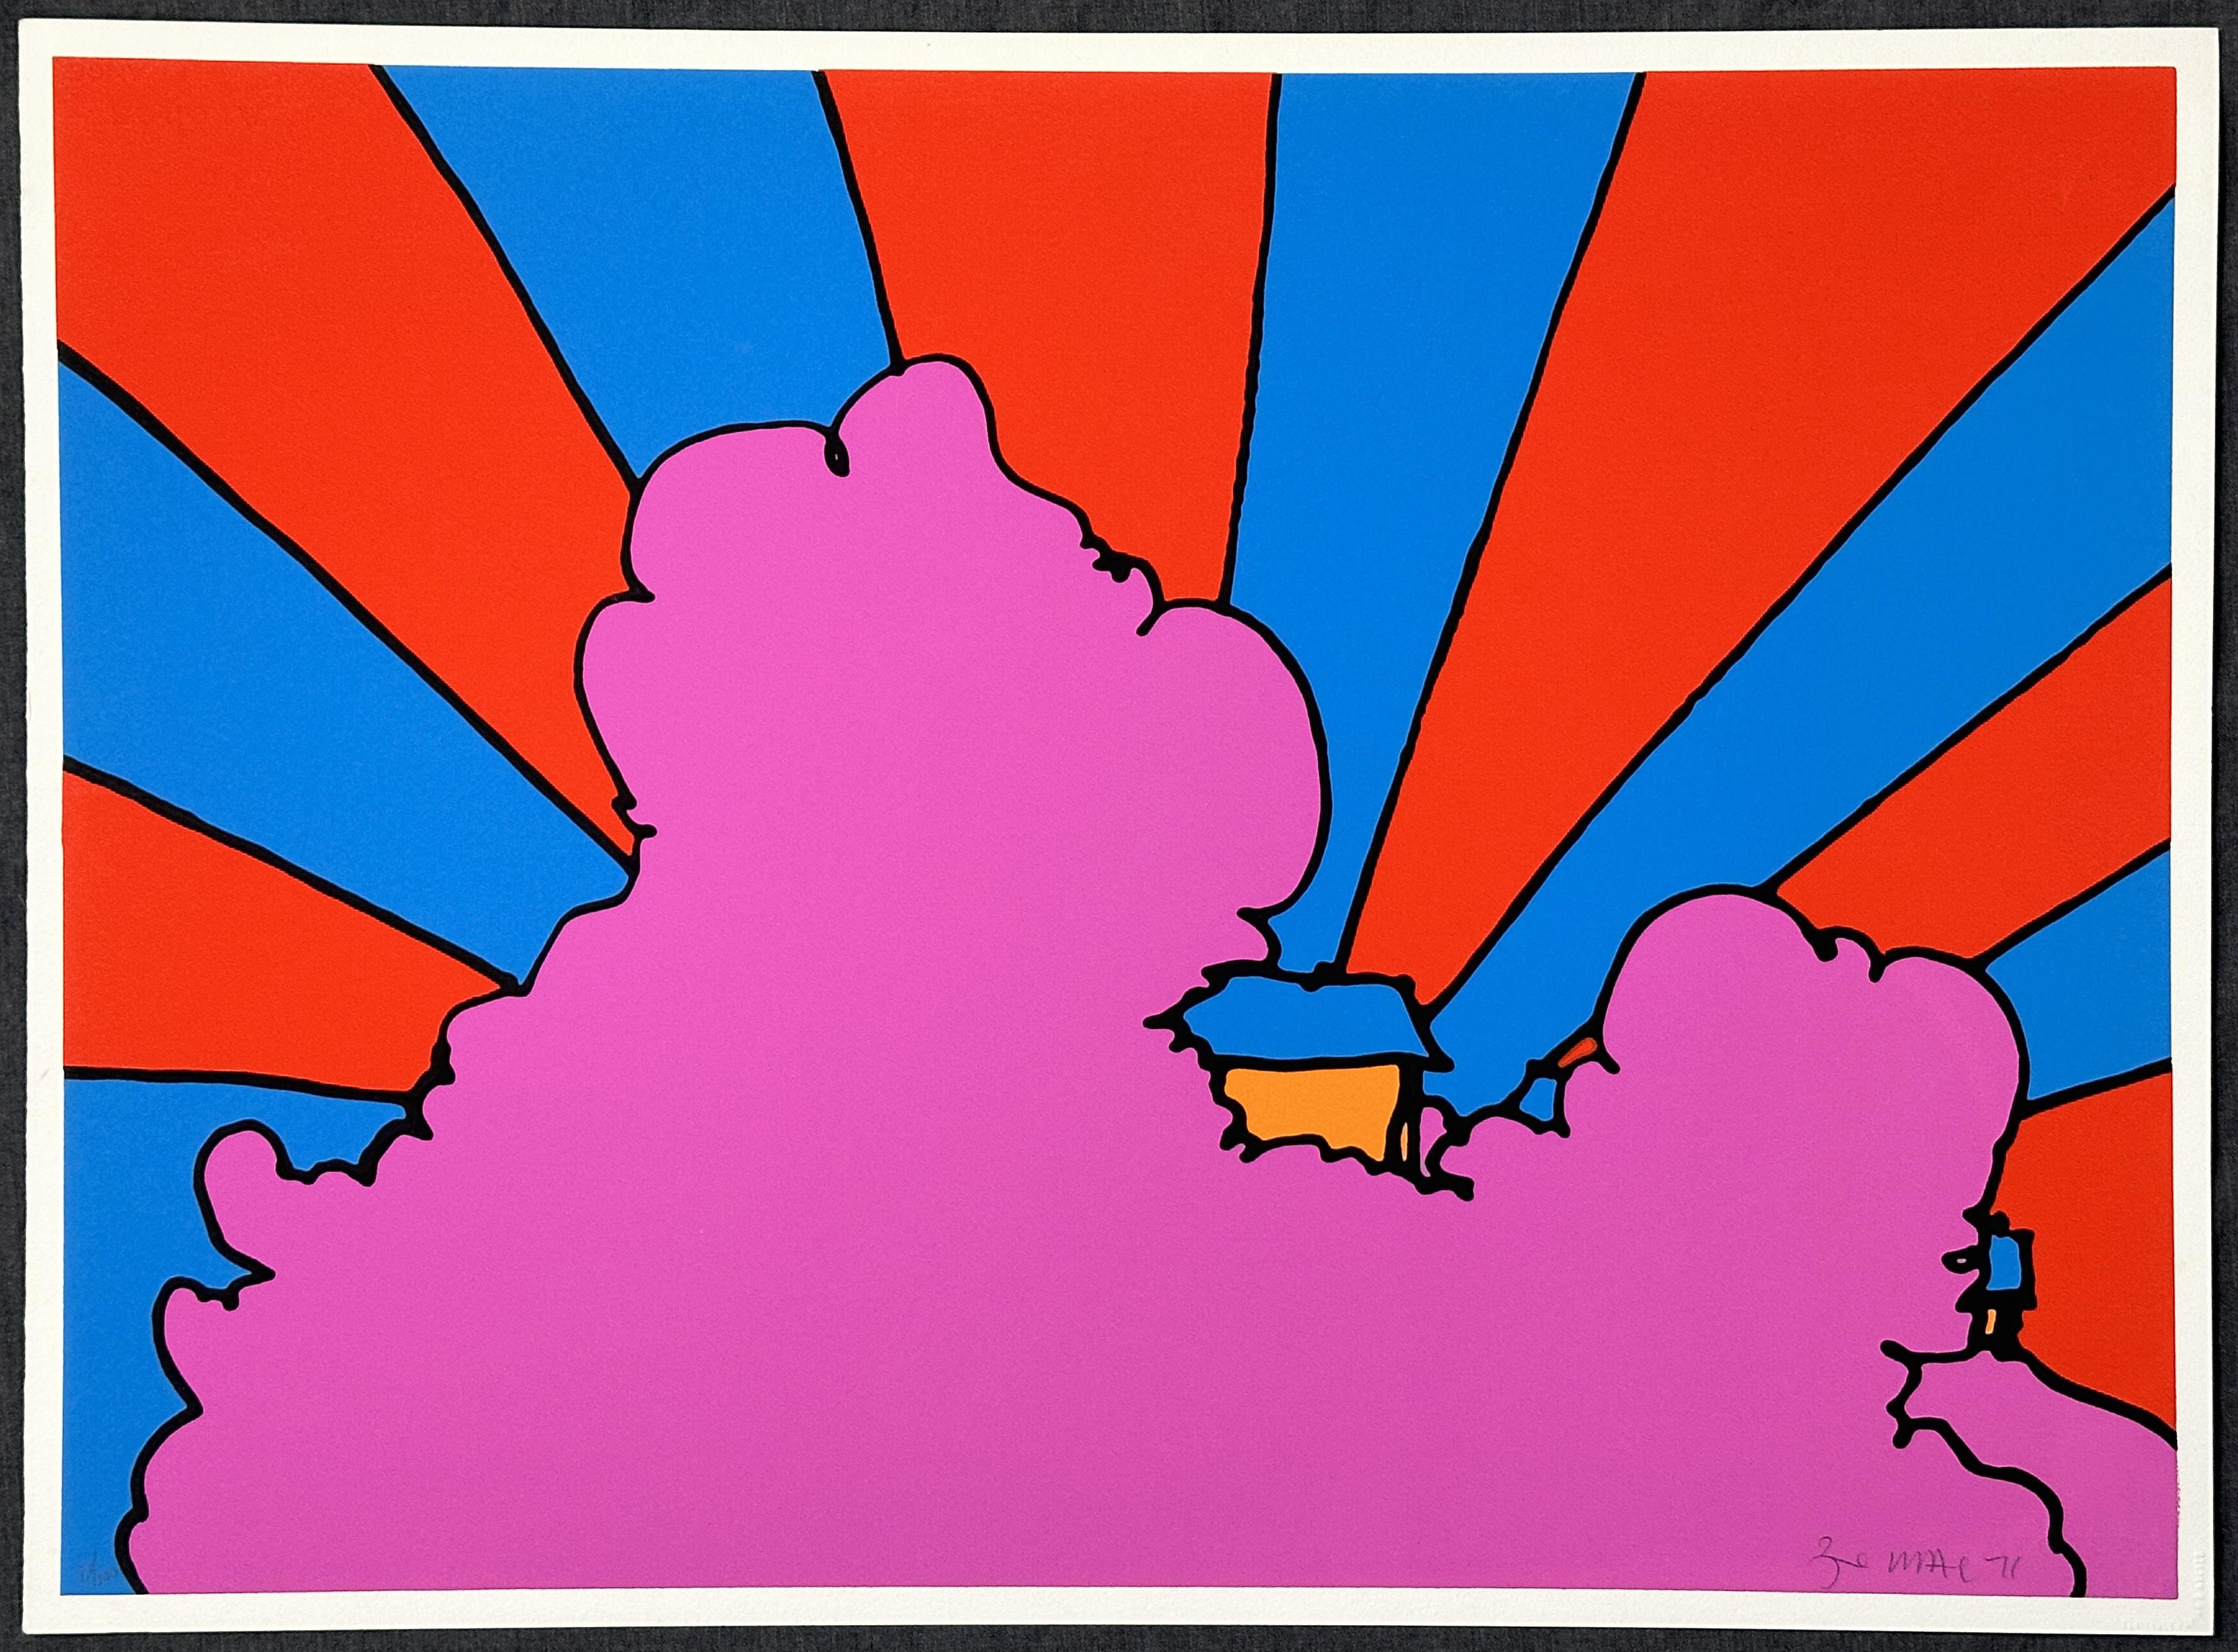 Artist Name: Peter Max
House in the Clouds 
Year: 1971
Medium Type: Silkscreen, on Arches Paper
Size-Width | Size-Height: 22” x 30”
Signed | Edition Size: signed in pencil and numbered 17/100

Beginning in the 1960s Peter Max has been rendering